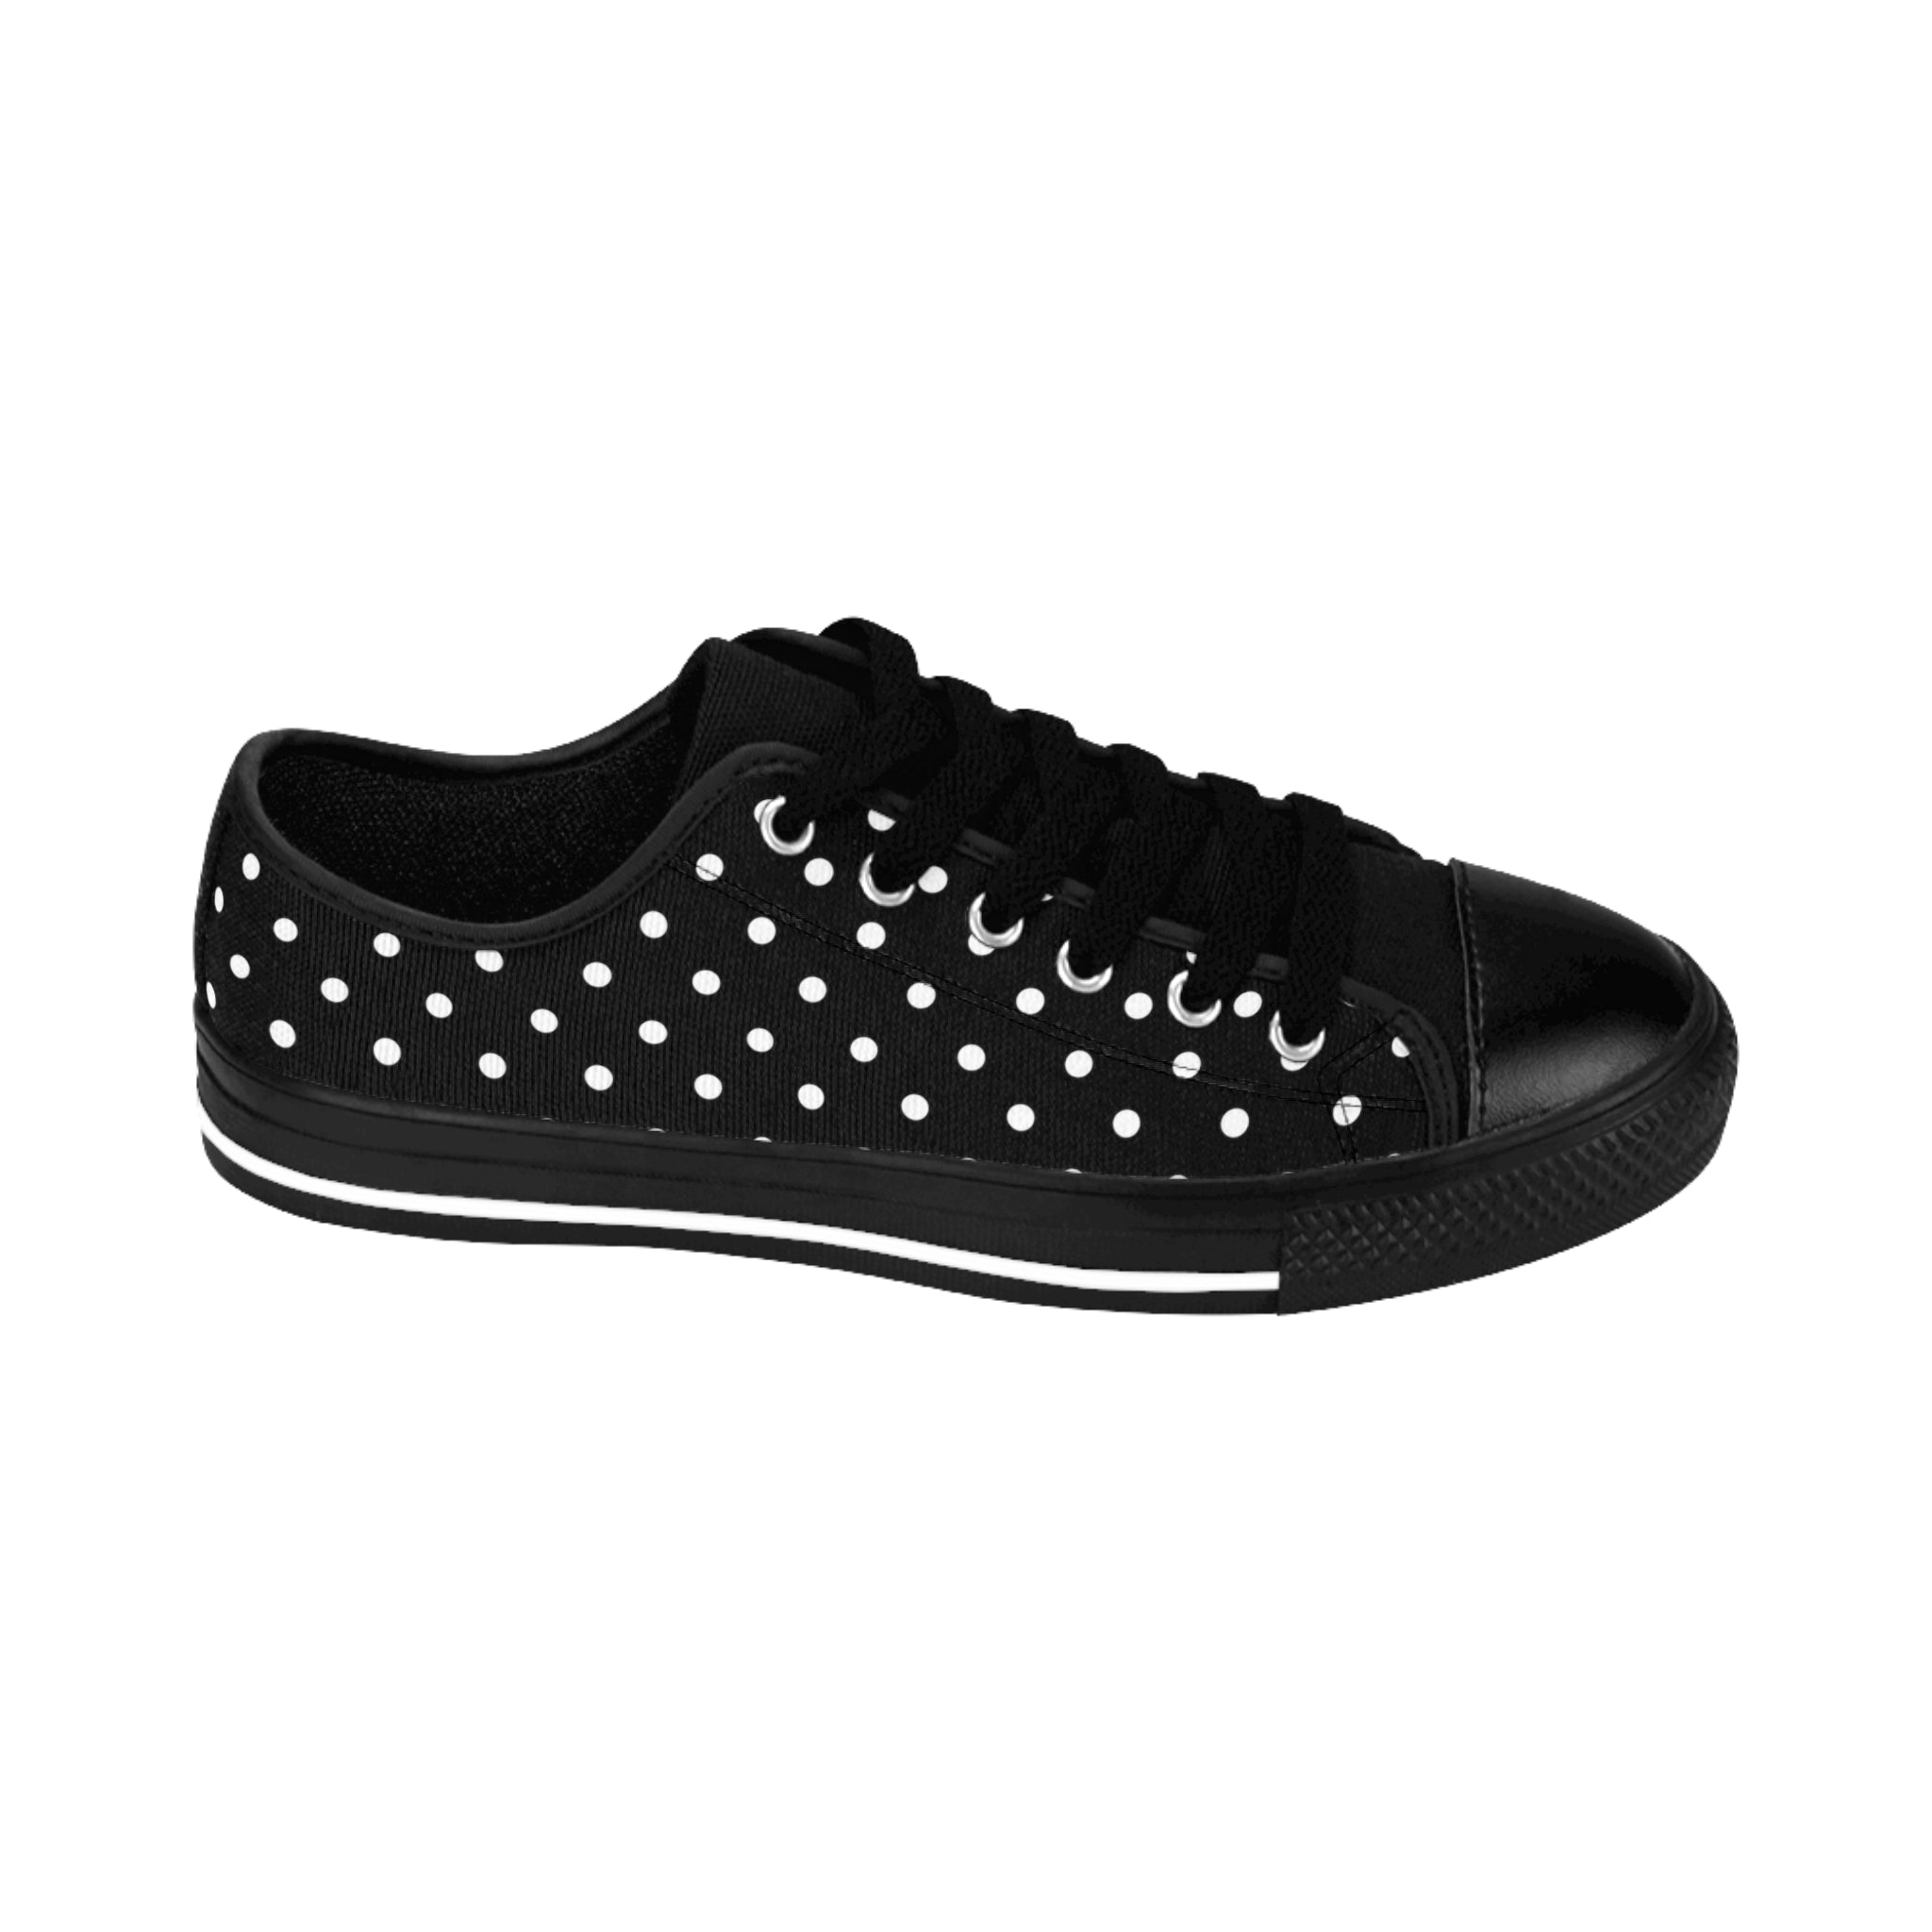 Polka Dots For days (Pattern in White) Black Women's Low Top Canvas Shoes Shoes US-11-Black-sole The Middle Aged Groove